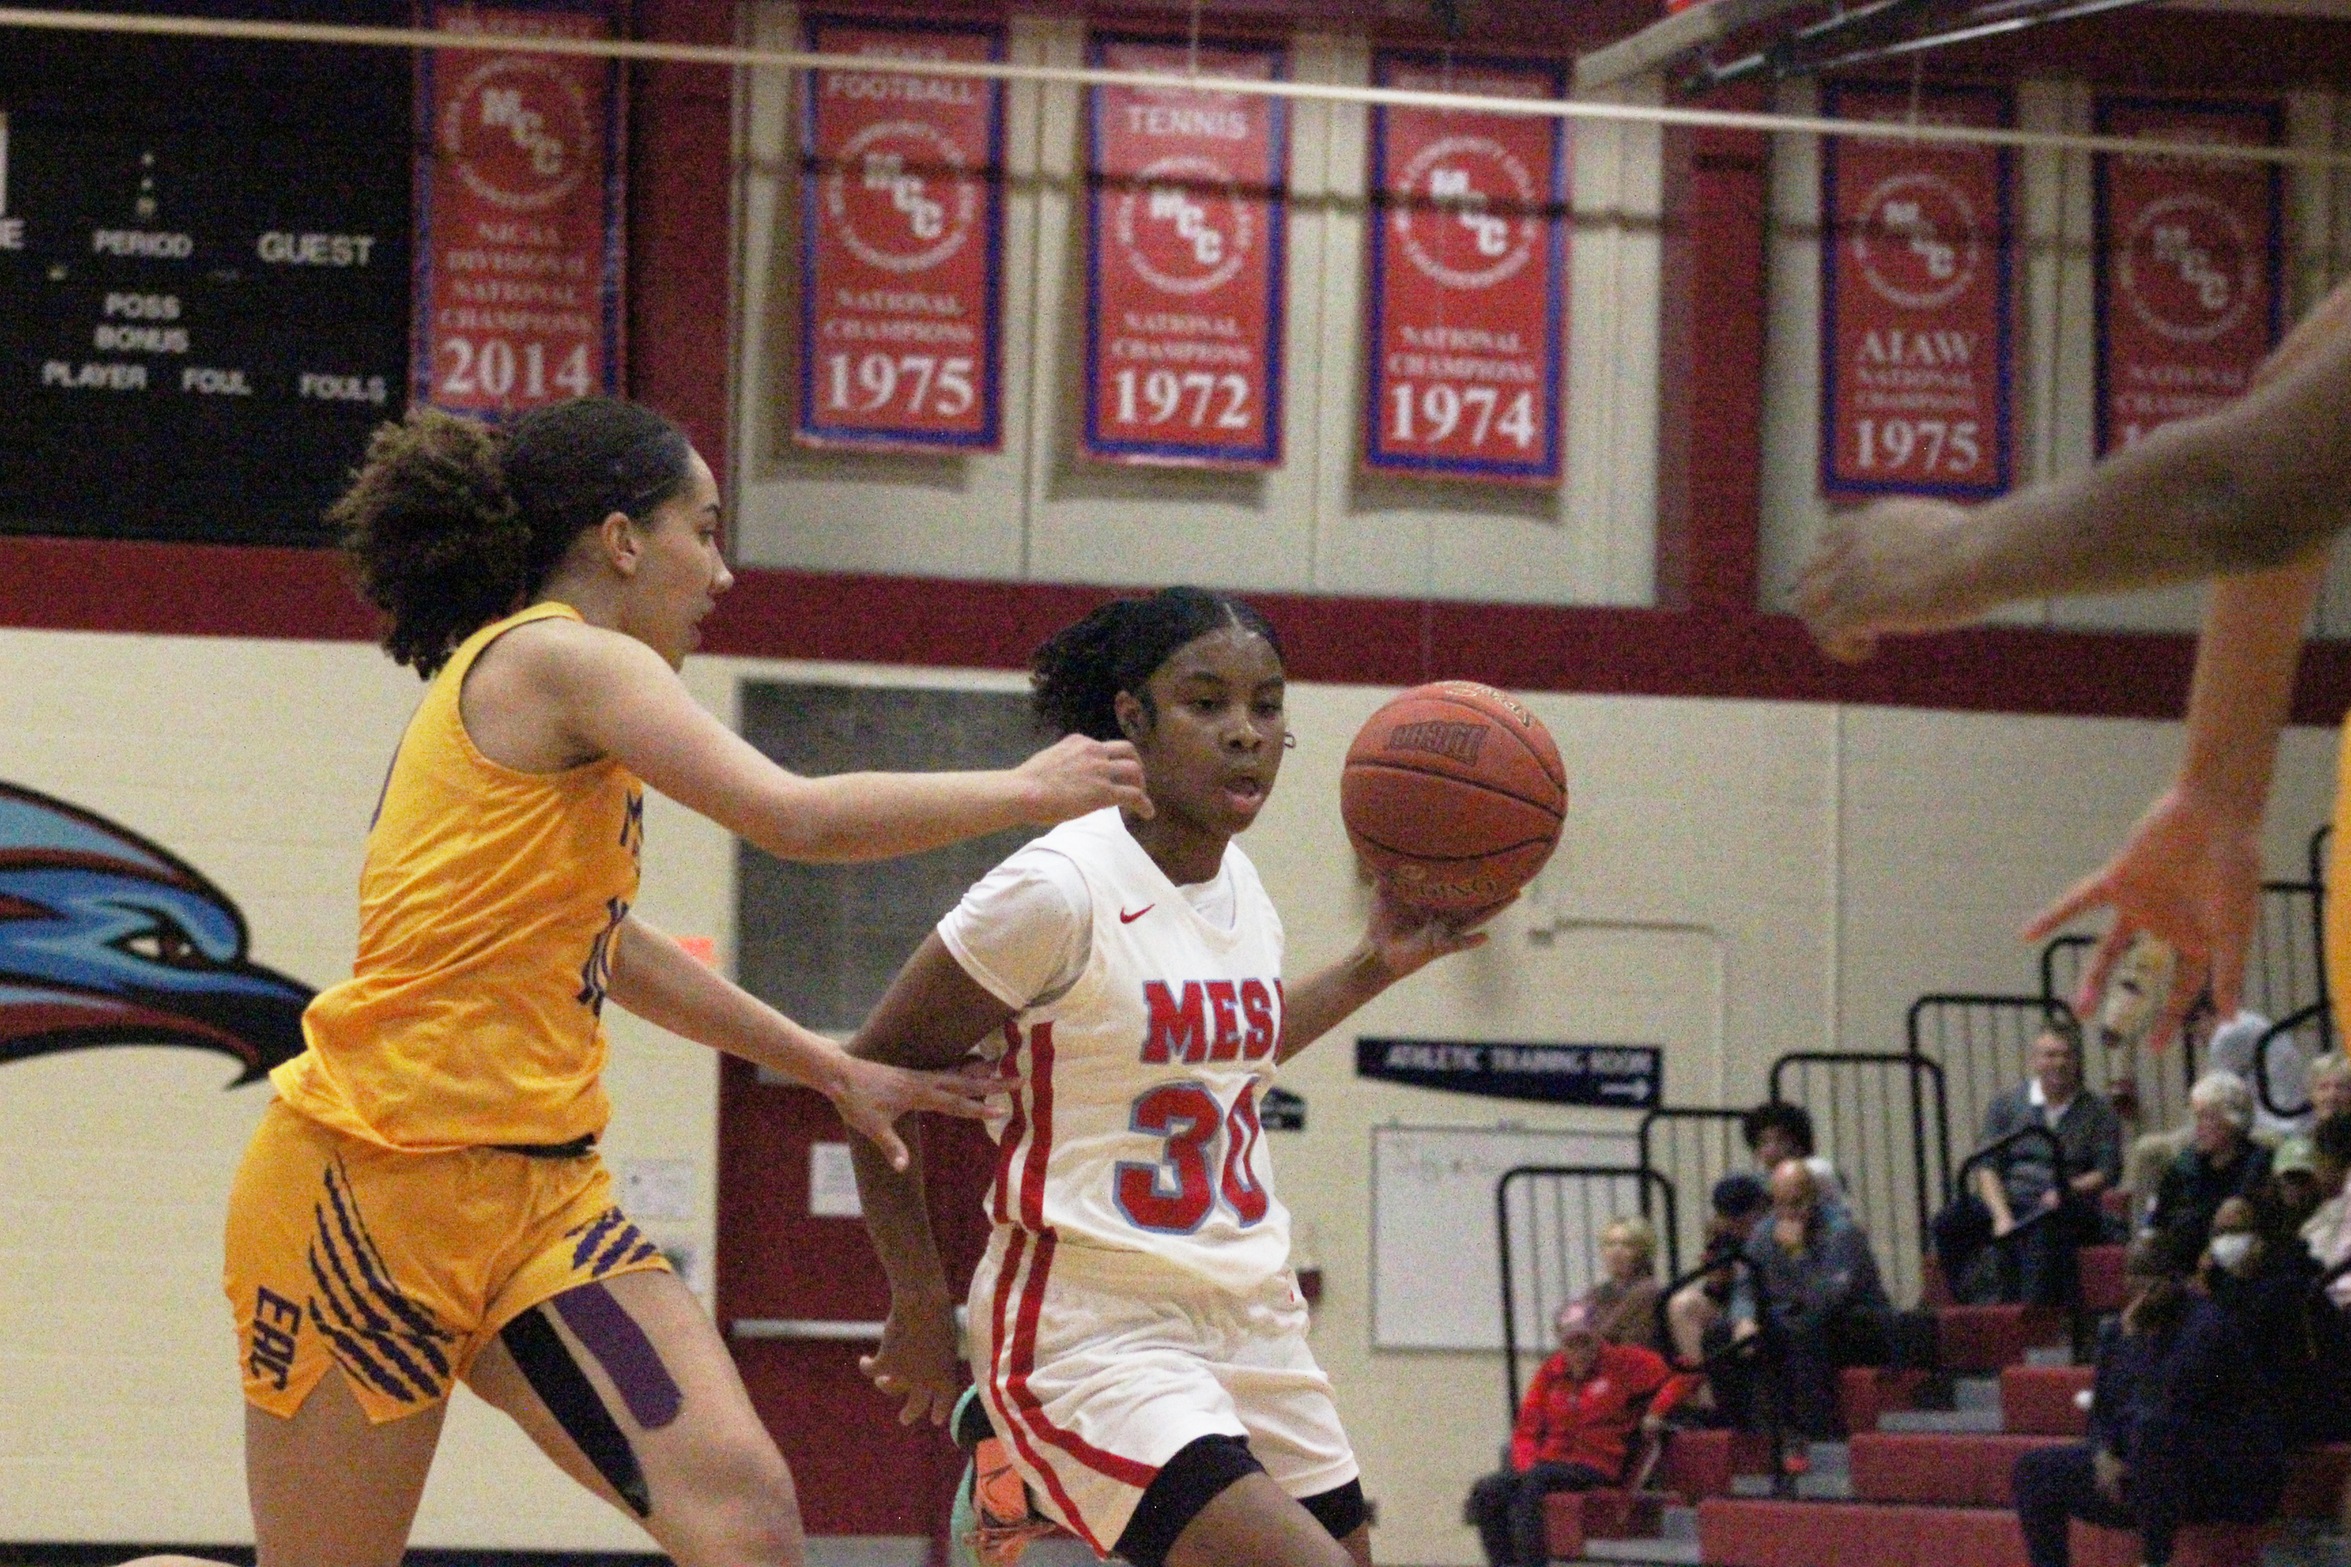 WBB Earns No. 2 Seed With Win Over SMCC